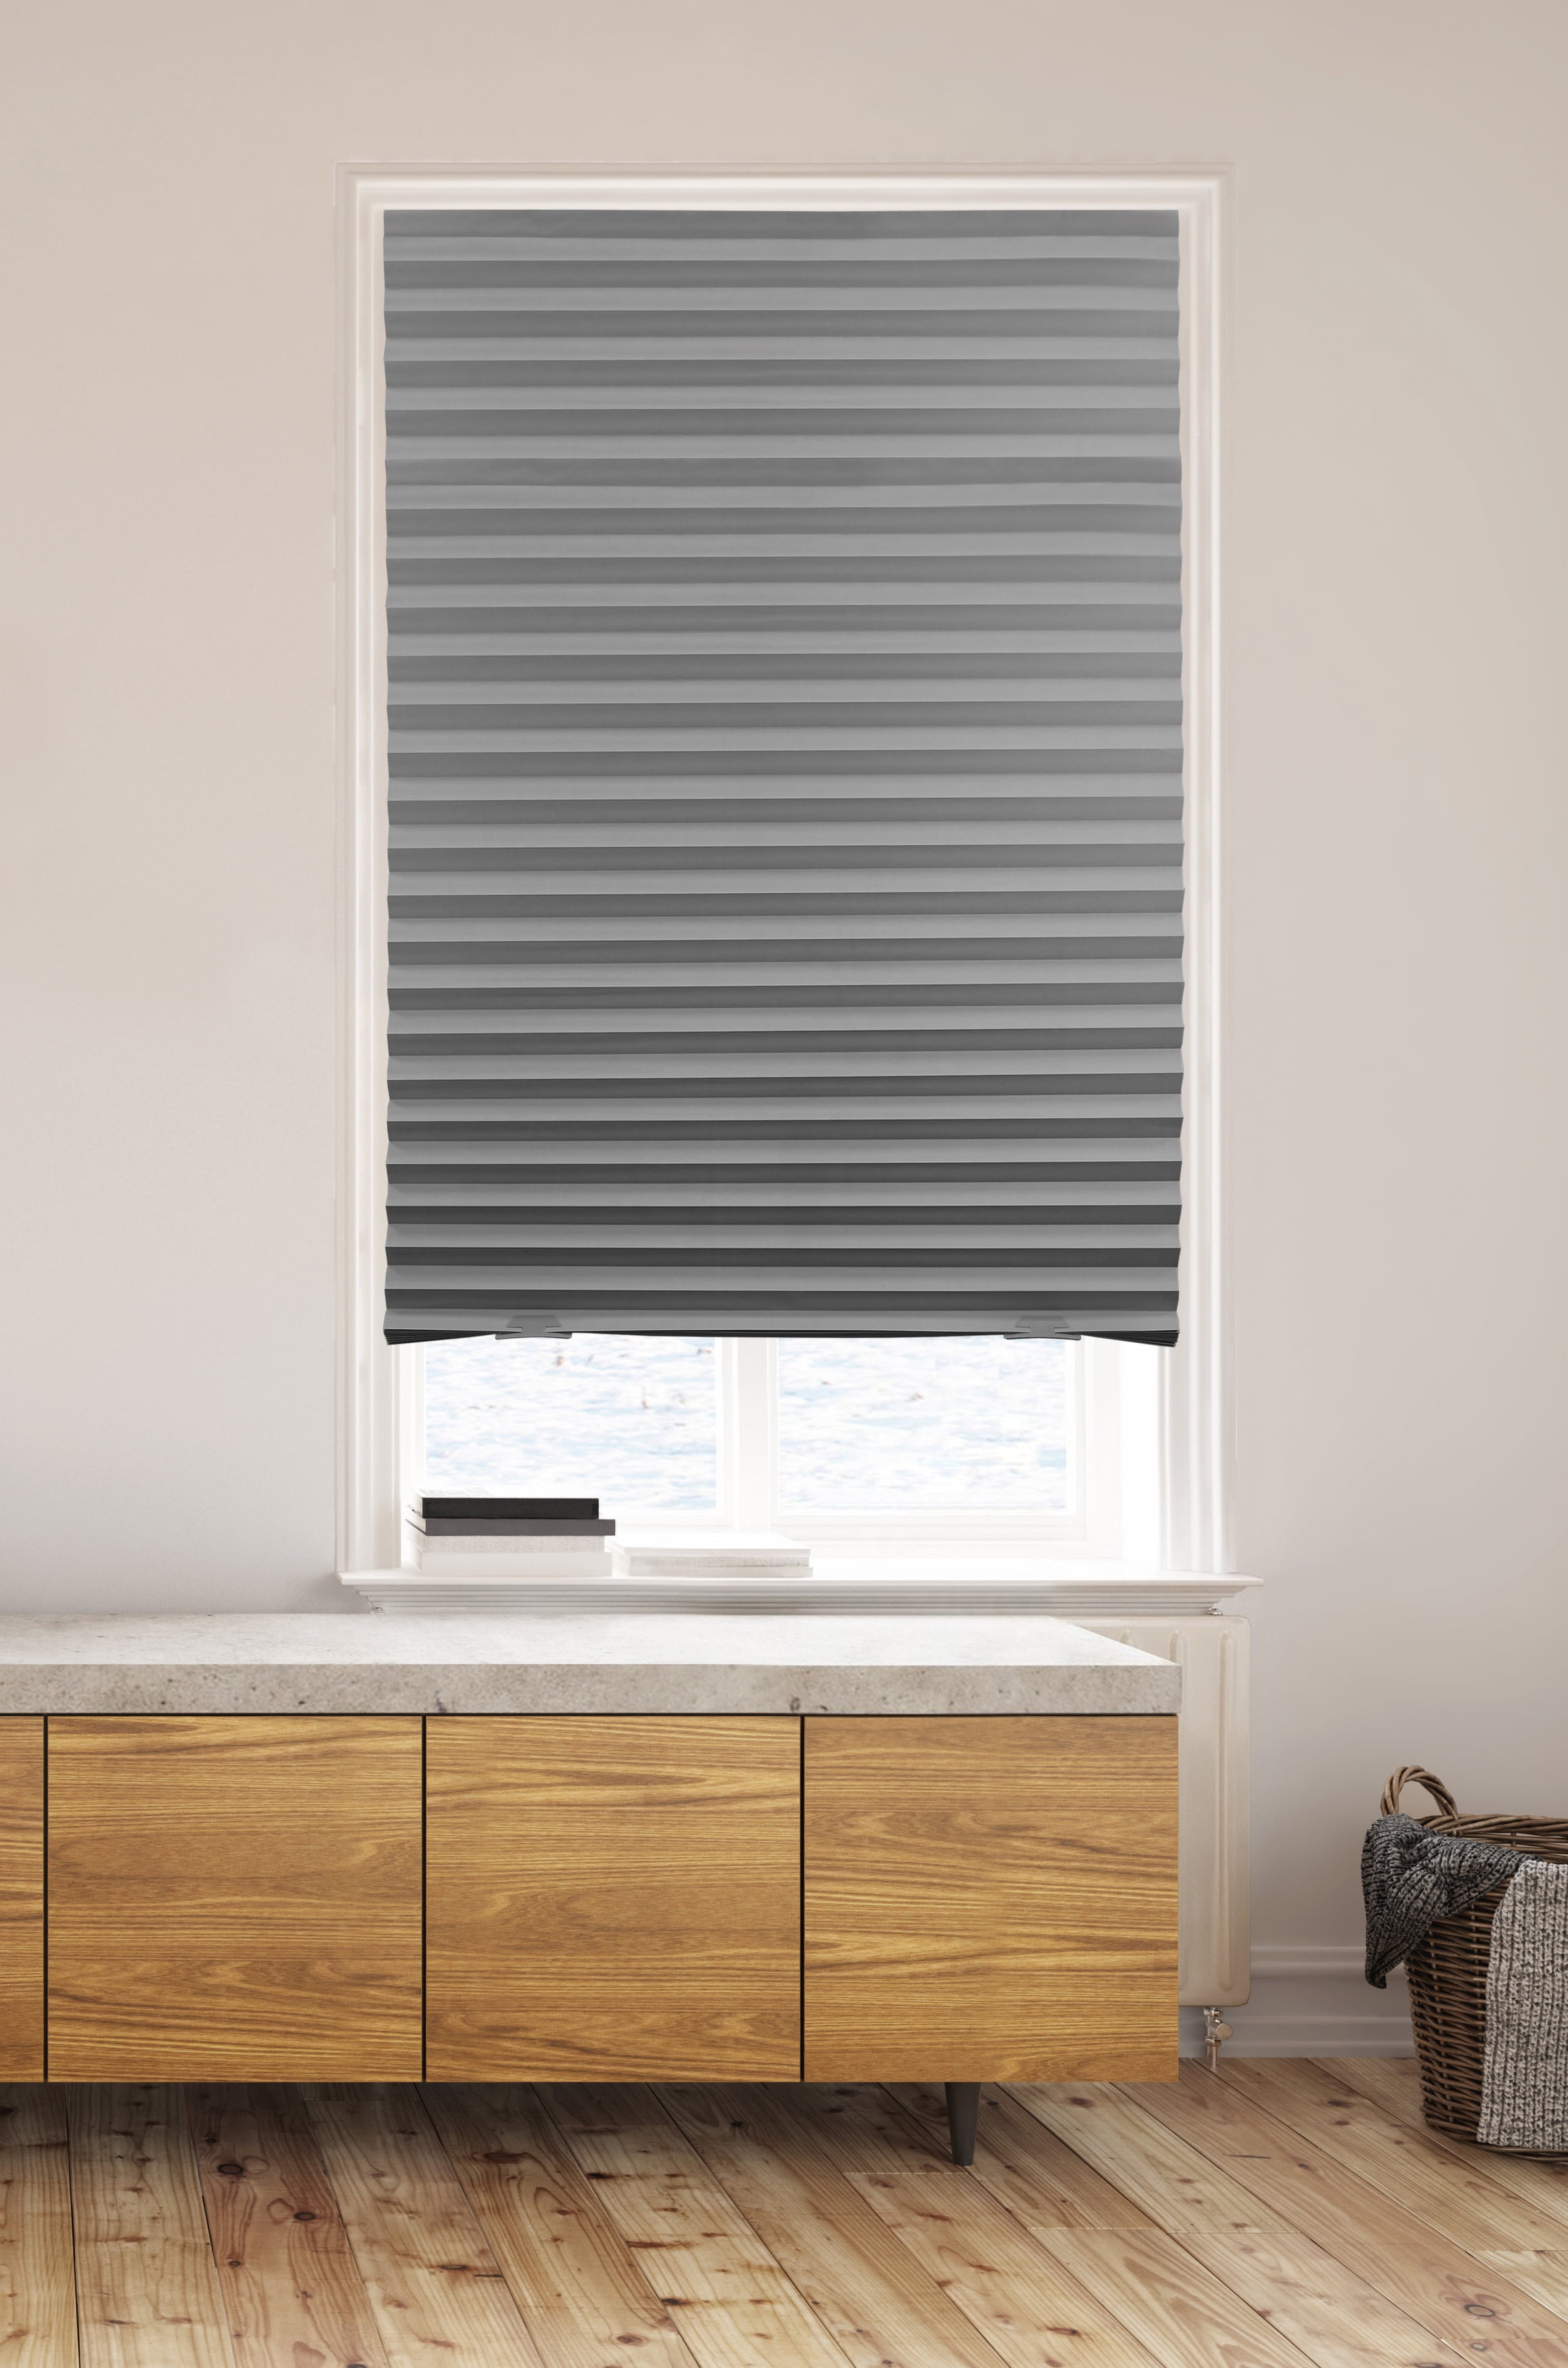 Easy Clip White Pleated Blind